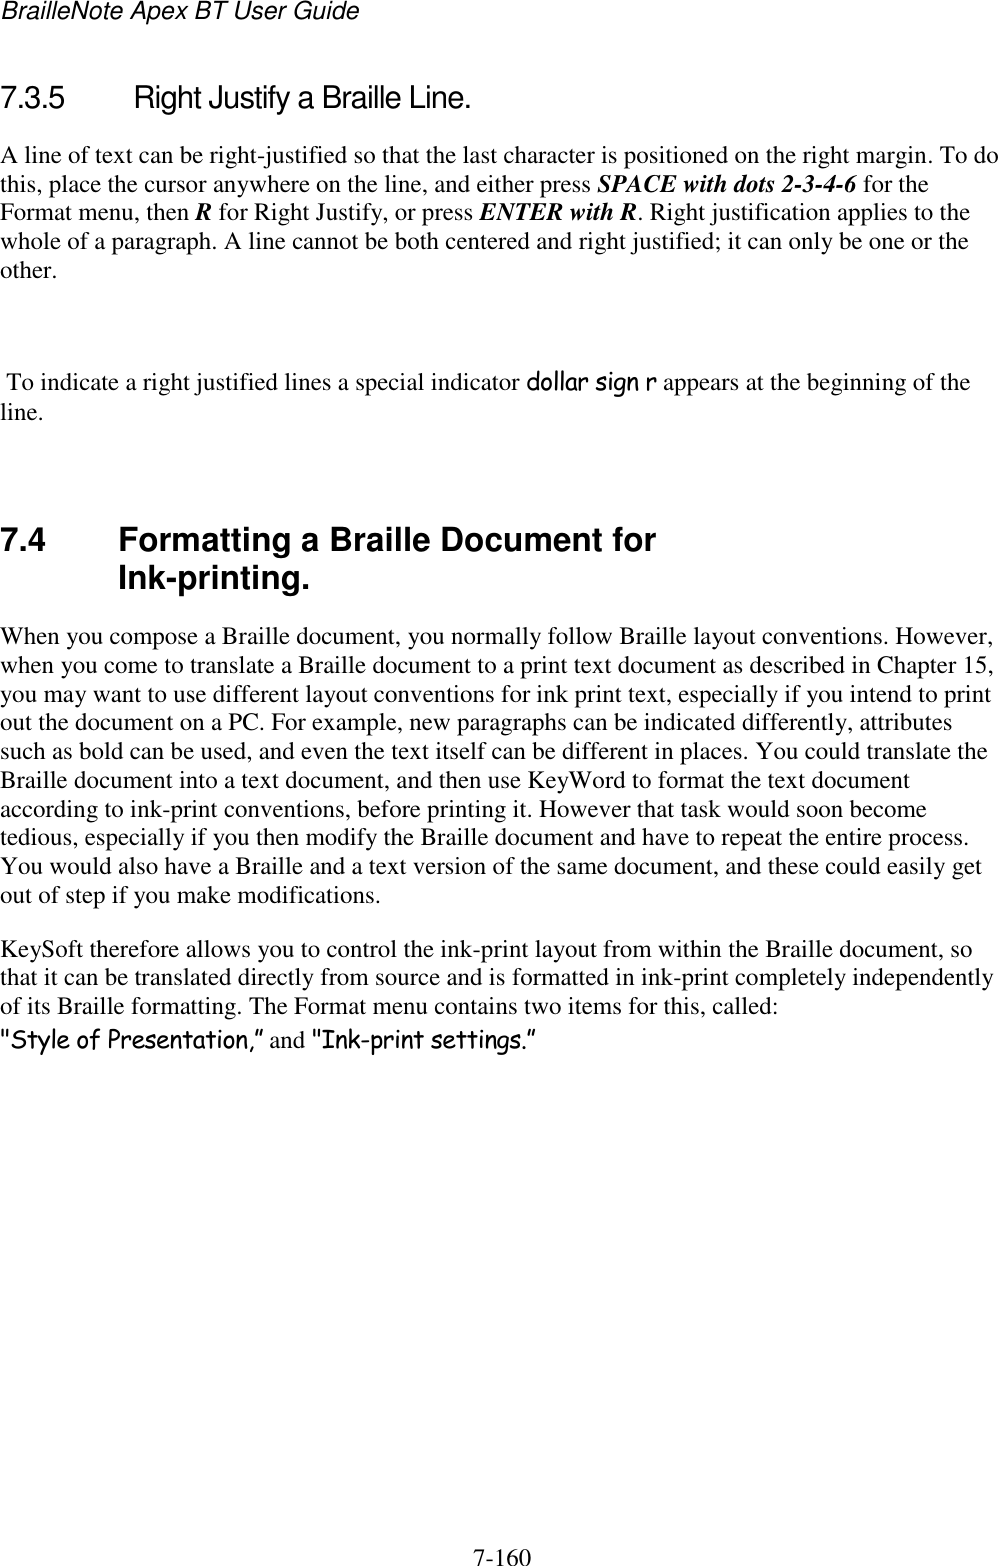 BrailleNote Apex BT User Guide   7-160   7.3.5  Right Justify a Braille Line. A line of text can be right-justified so that the last character is positioned on the right margin. To do this, place the cursor anywhere on the line, and either press SPACE with dots 2-3-4-6 for the Format menu, then R for Right Justify, or press ENTER with R. Right justification applies to the whole of a paragraph. A line cannot be both centered and right justified; it can only be one or the other.   To indicate a right justified lines a special indicator dollar sign r appears at the beginning of the line.   7.4  Formatting a Braille Document for Ink-printing. When you compose a Braille document, you normally follow Braille layout conventions. However, when you come to translate a Braille document to a print text document as described in Chapter 15, you may want to use different layout conventions for ink print text, especially if you intend to print out the document on a PC. For example, new paragraphs can be indicated differently, attributes such as bold can be used, and even the text itself can be different in places. You could translate the Braille document into a text document, and then use KeyWord to format the text document according to ink-print conventions, before printing it. However that task would soon become tedious, especially if you then modify the Braille document and have to repeat the entire process. You would also have a Braille and a text version of the same document, and these could easily get out of step if you make modifications. KeySoft therefore allows you to control the ink-print layout from within the Braille document, so that it can be translated directly from source and is formatted in ink-print completely independently of its Braille formatting. The Format menu contains two items for this, called: &quot;Style of Presentation,” and &quot;Ink-print settings.”   